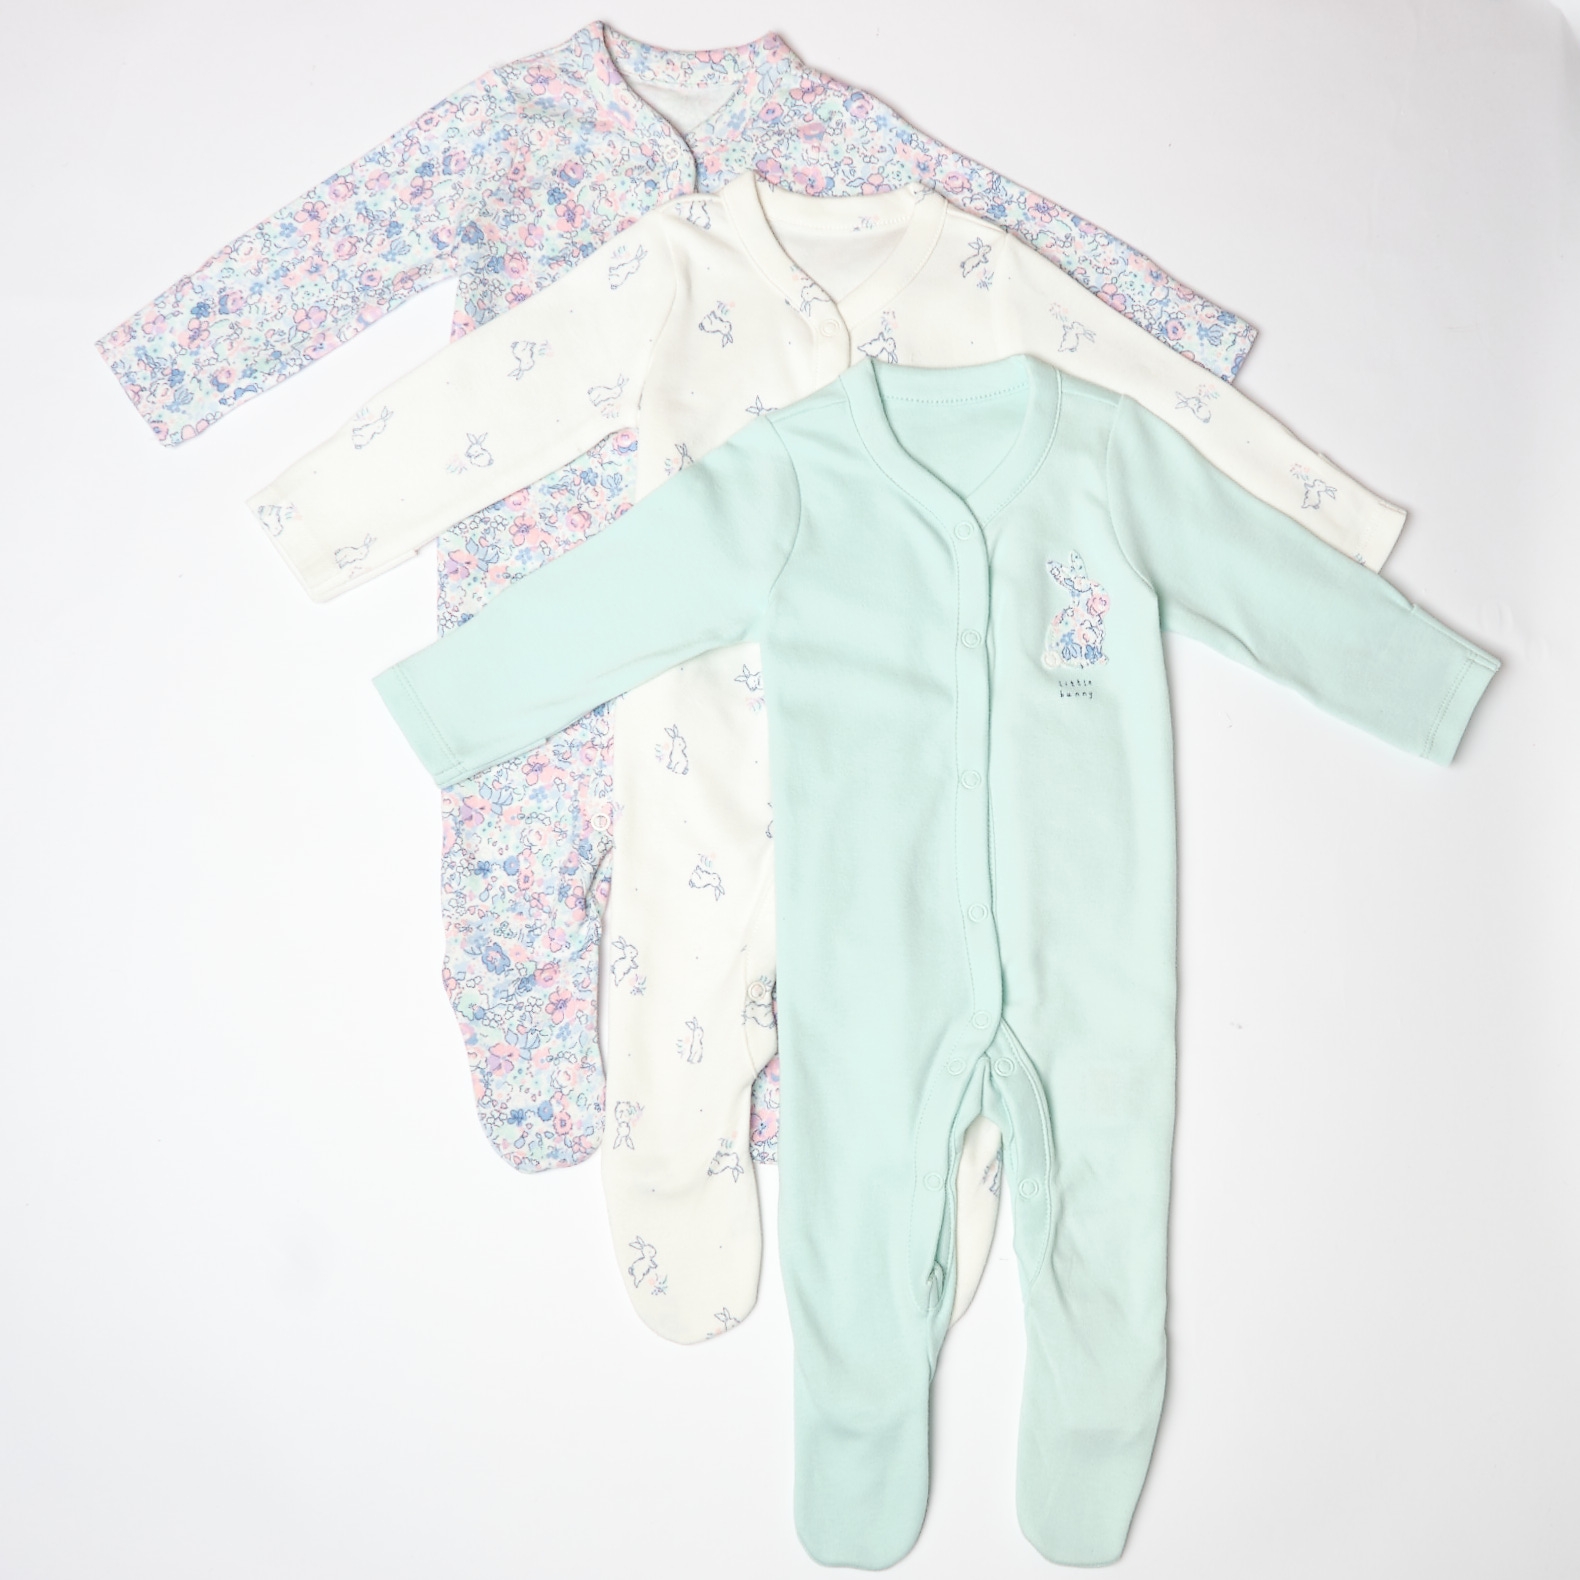 Girls Full Sleeves Sleepsuit Bunny And Floral Print - Pack Of 3 - Blue